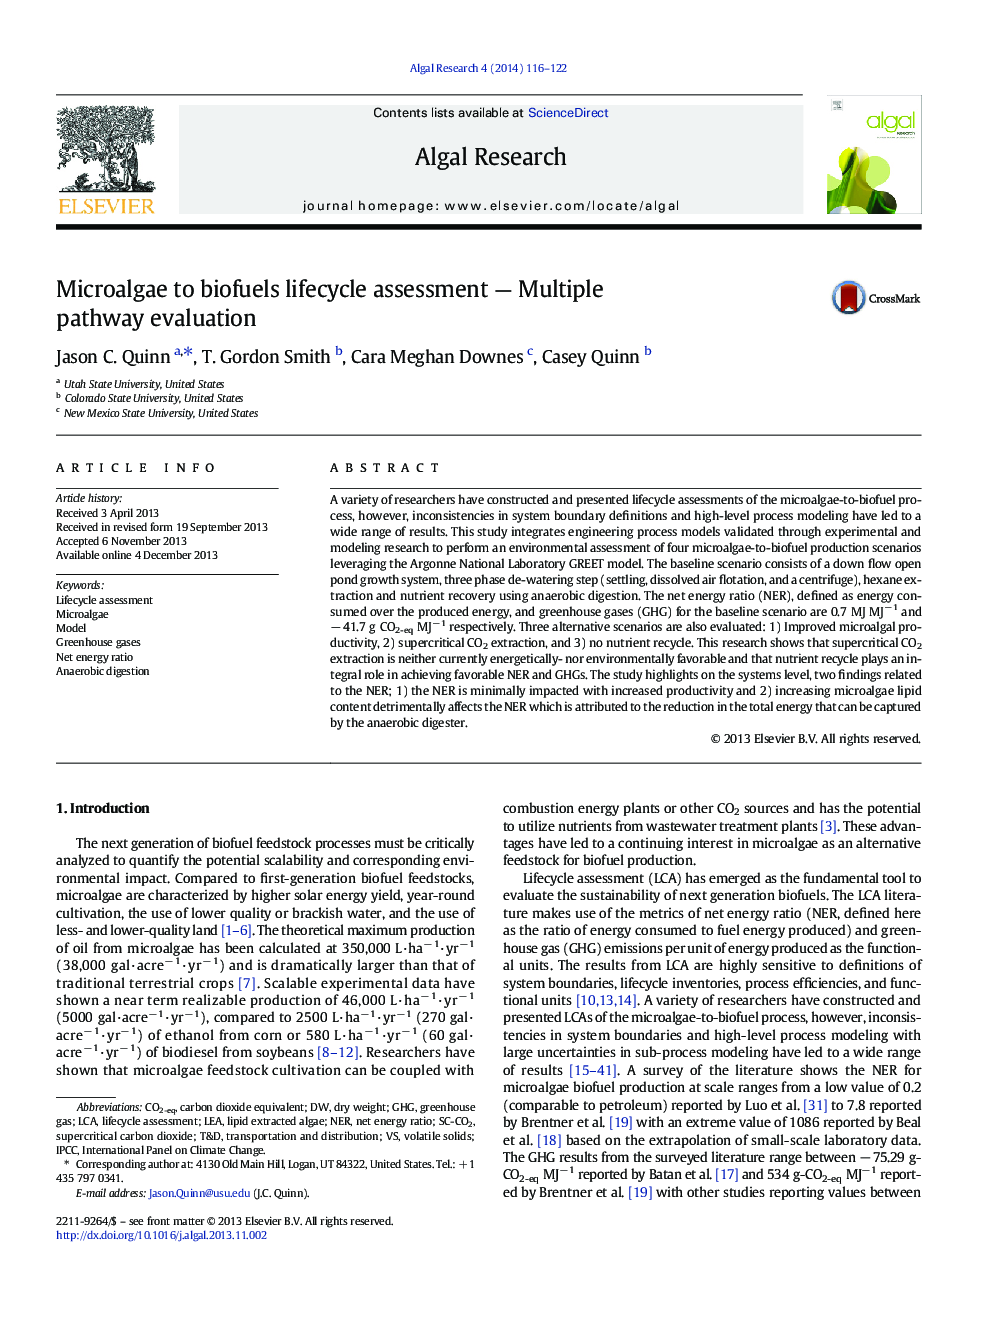 Microalgae to biofuels lifecycle assessment - Multiple pathway evaluation